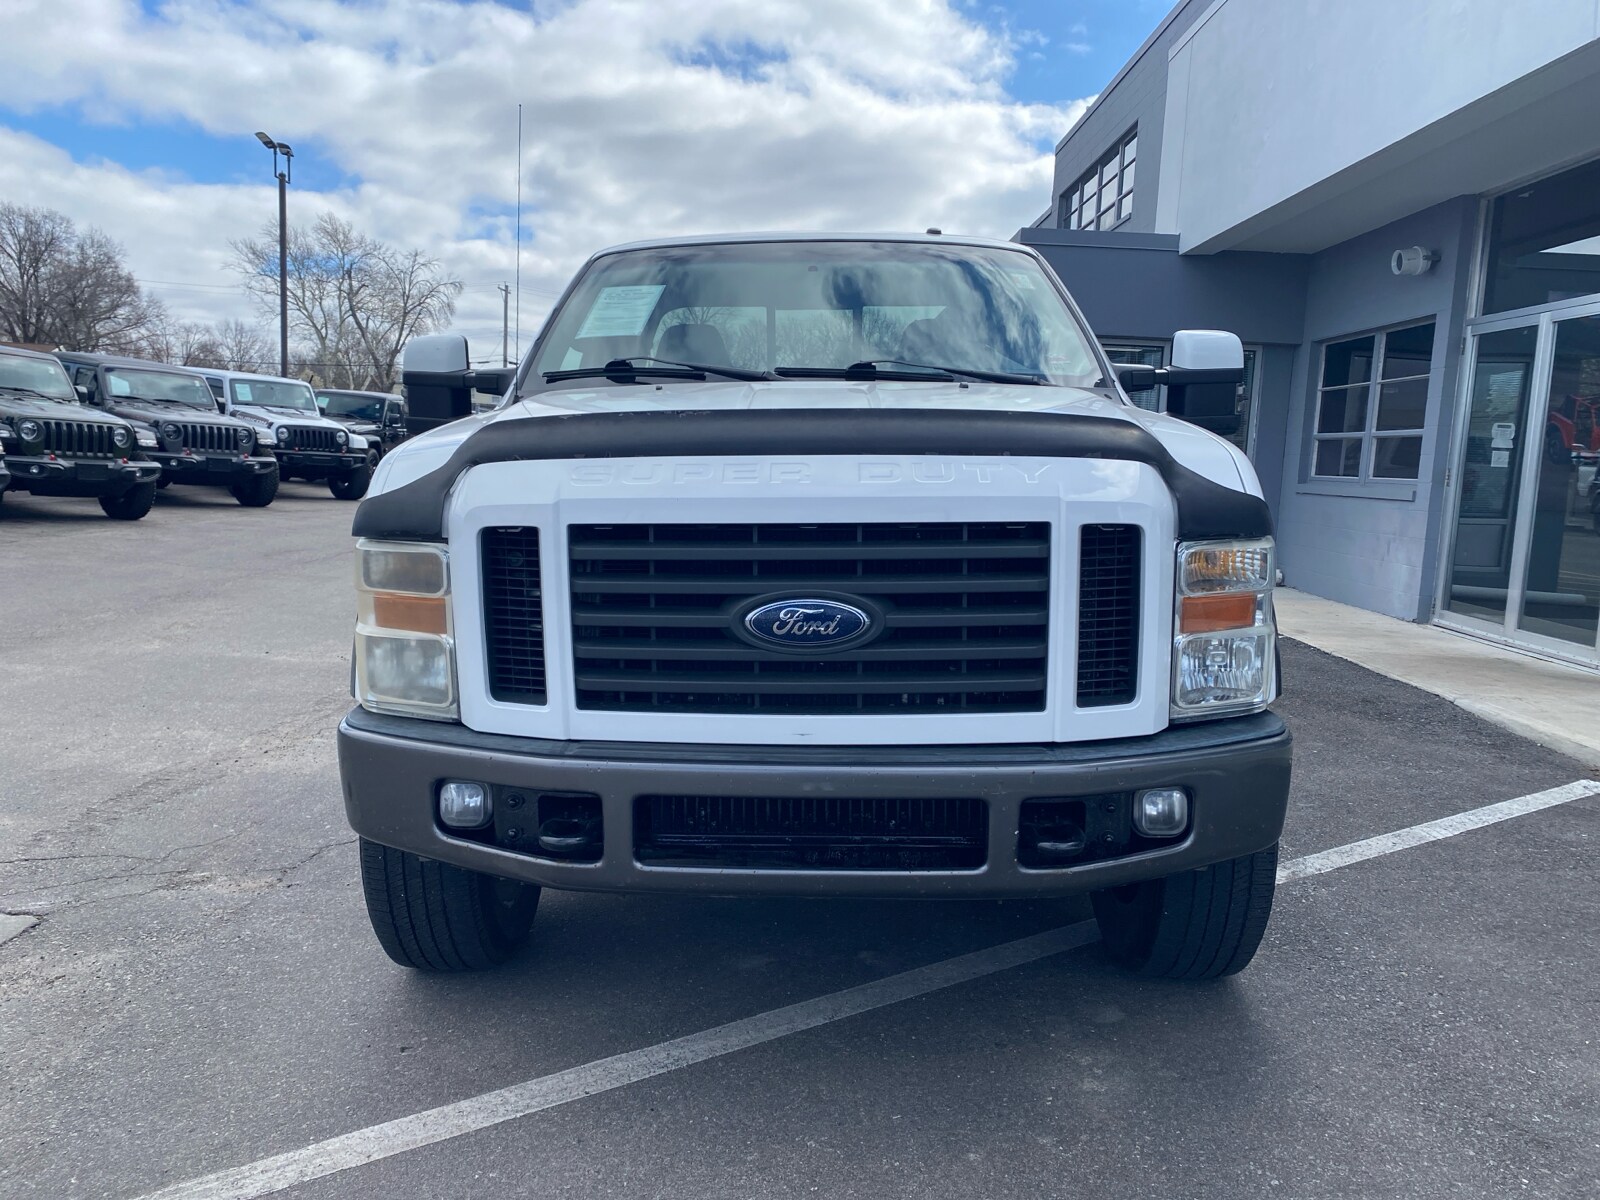 Used 2008 Ford F-350 Super Duty XLT with VIN 1FTWX31R08EB11697 for sale in Independence, MO